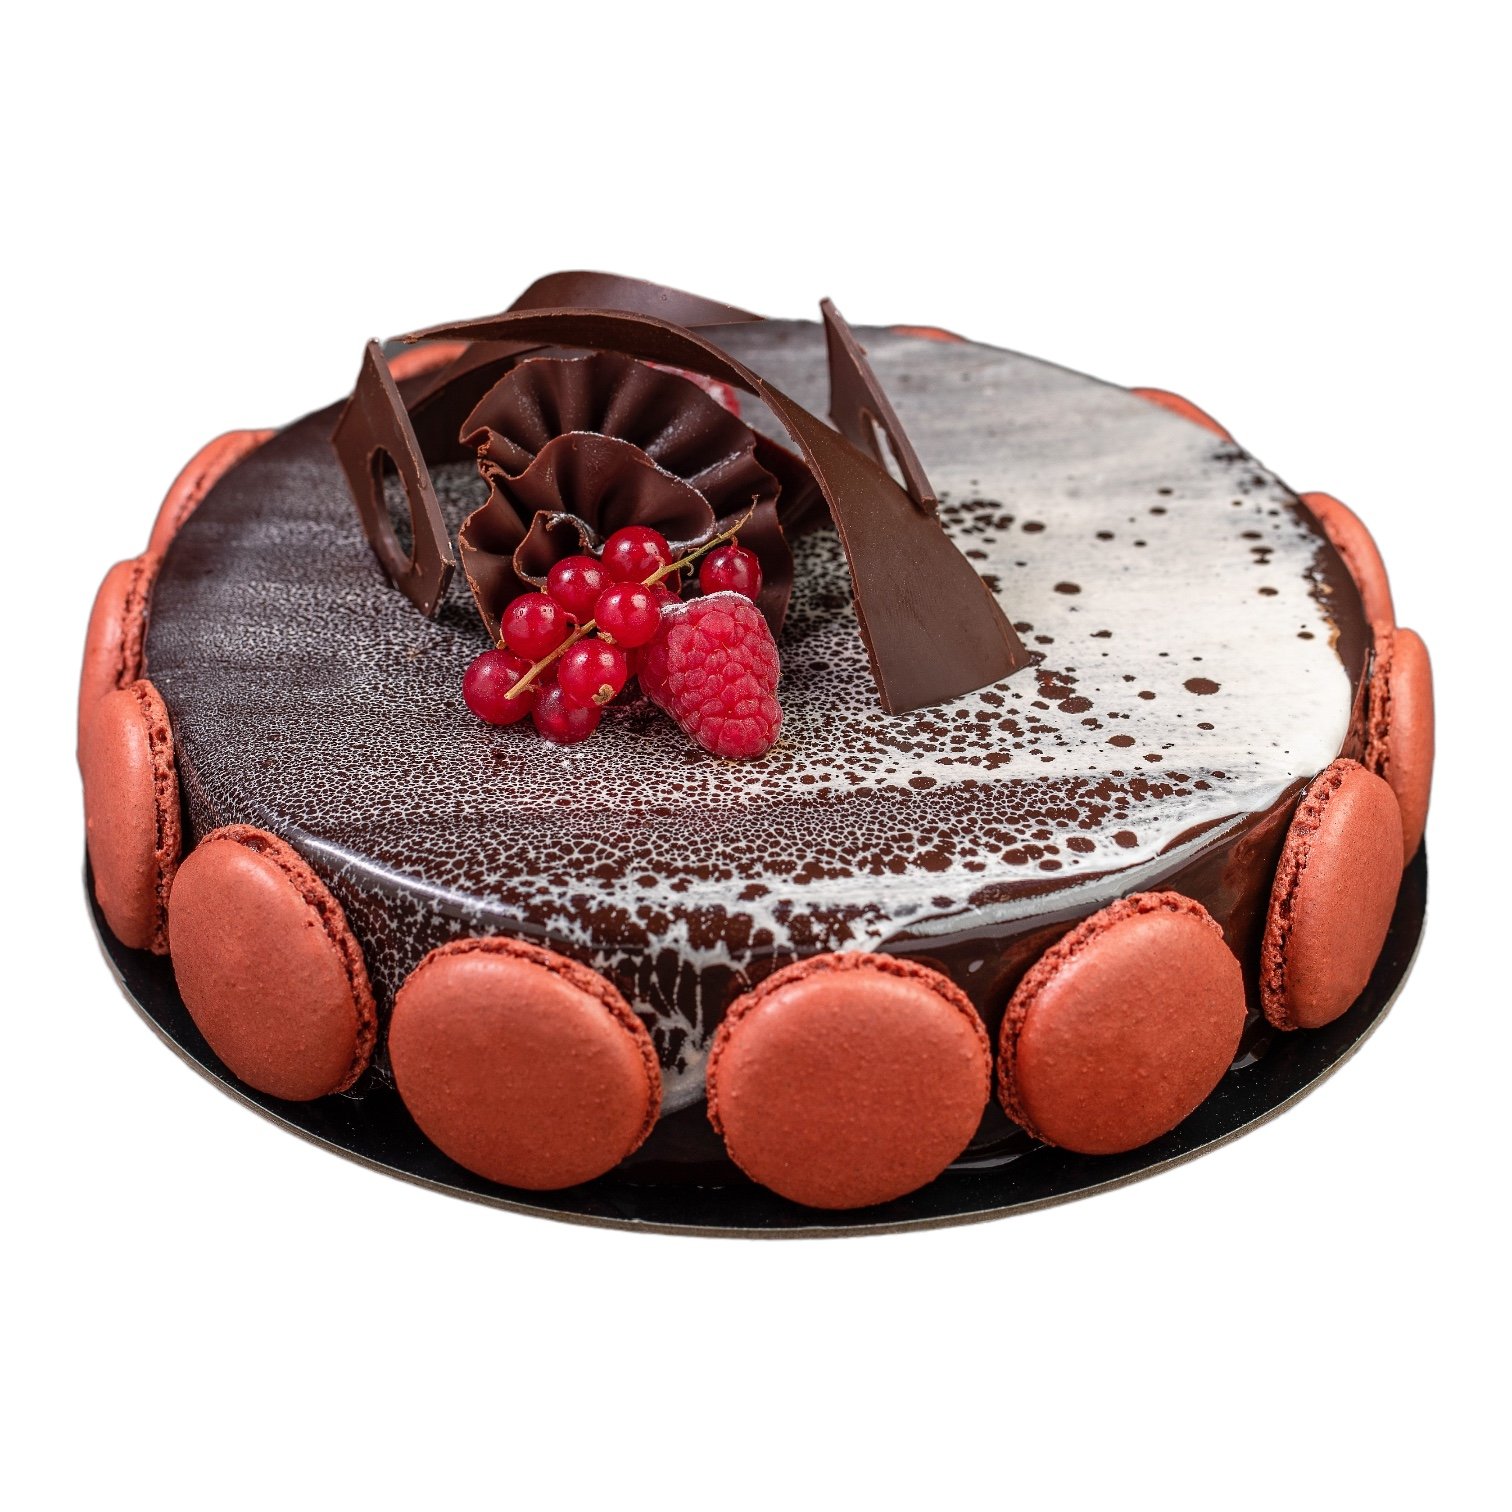 Cakes Delivery in Abu Dhabi | Cakes in Abu Dhabi - FNP